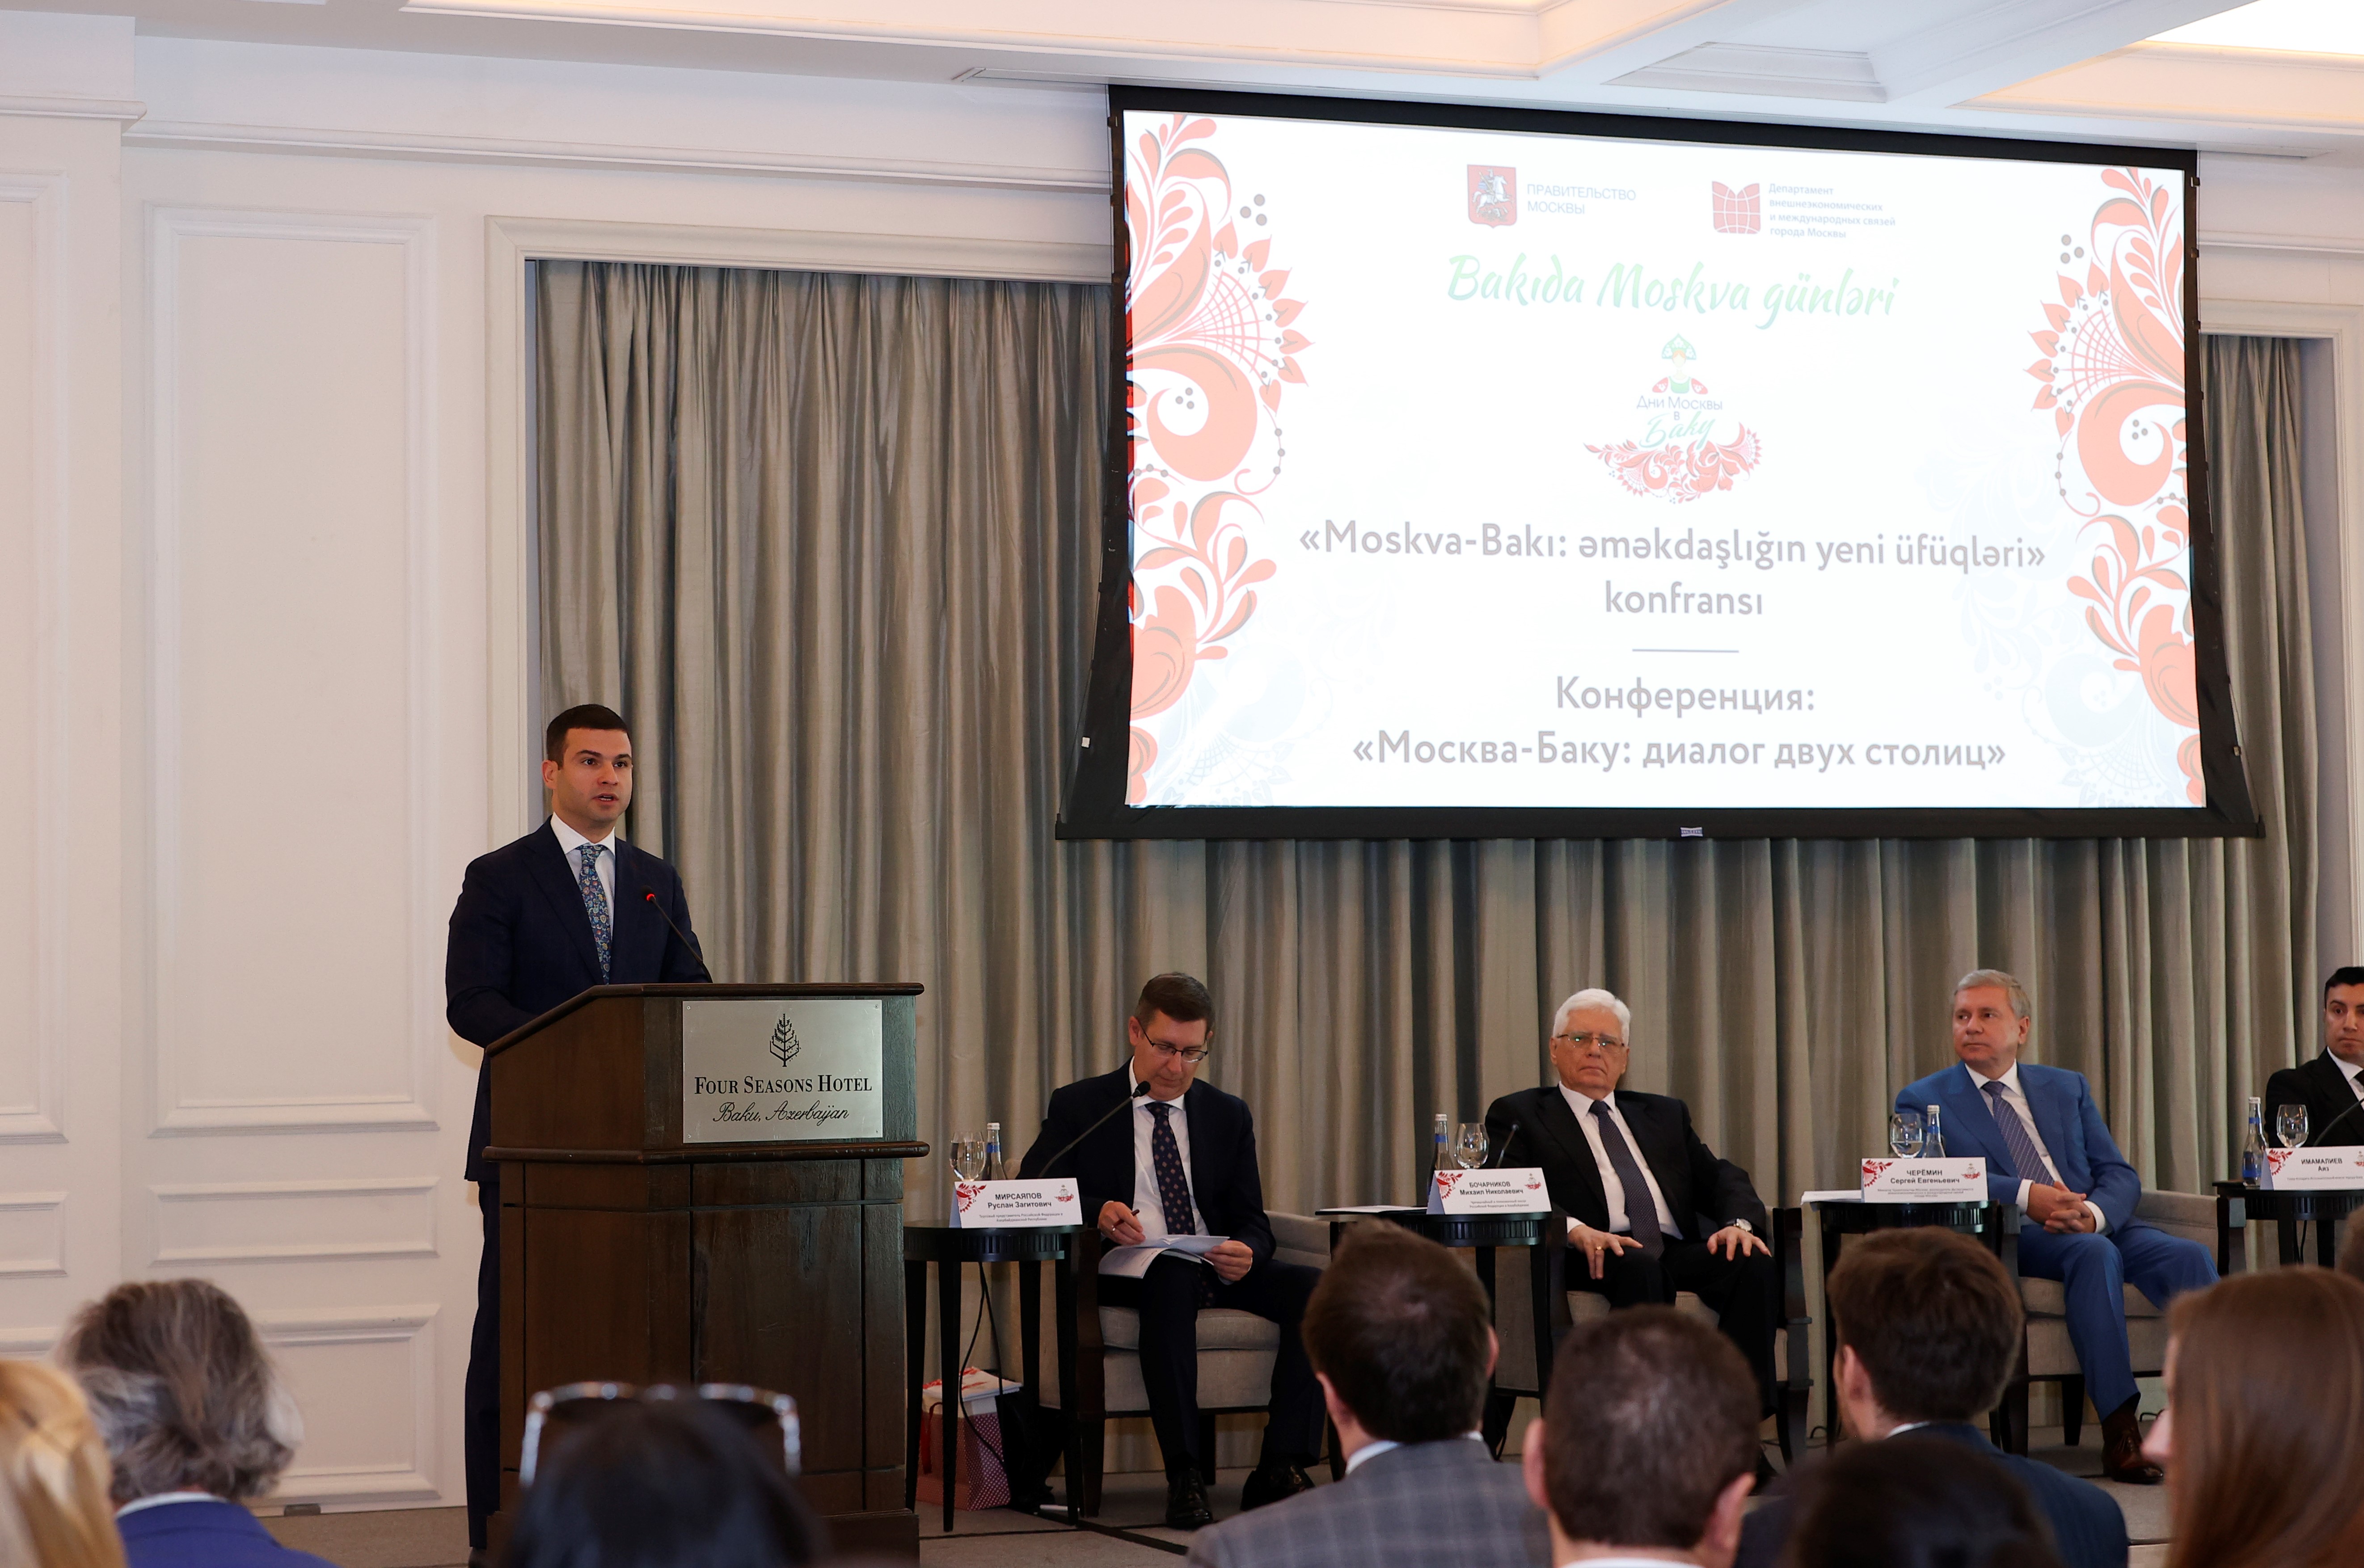 Conference on "Moscow-Baku: Dialogue of Two Capitals" held 